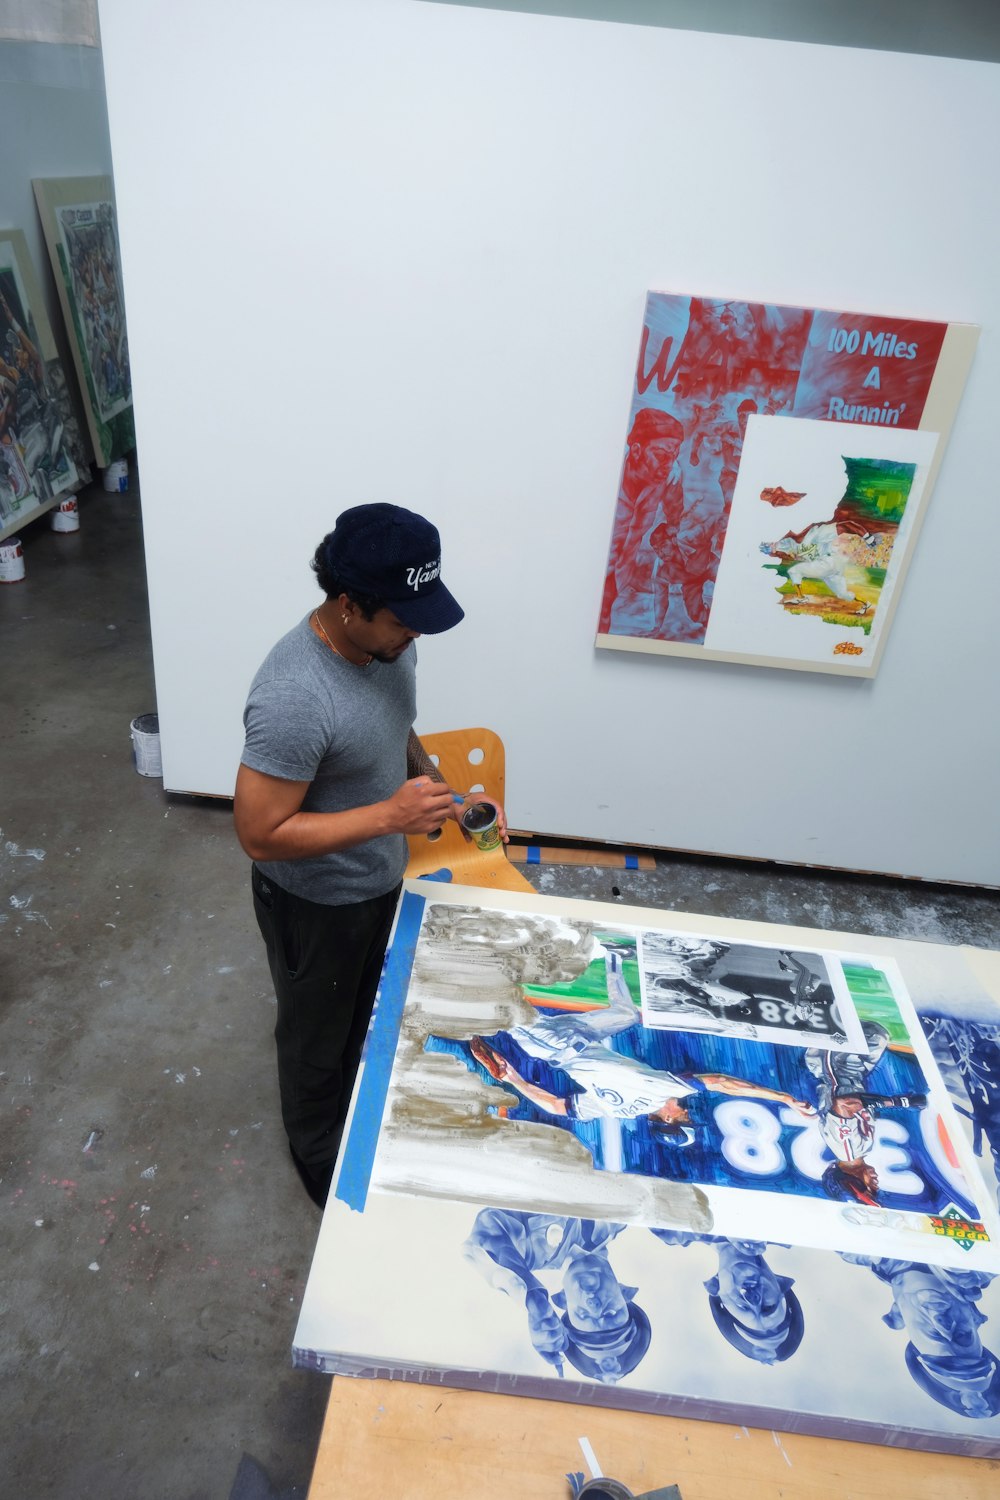 a man is working on a painting in an art studio